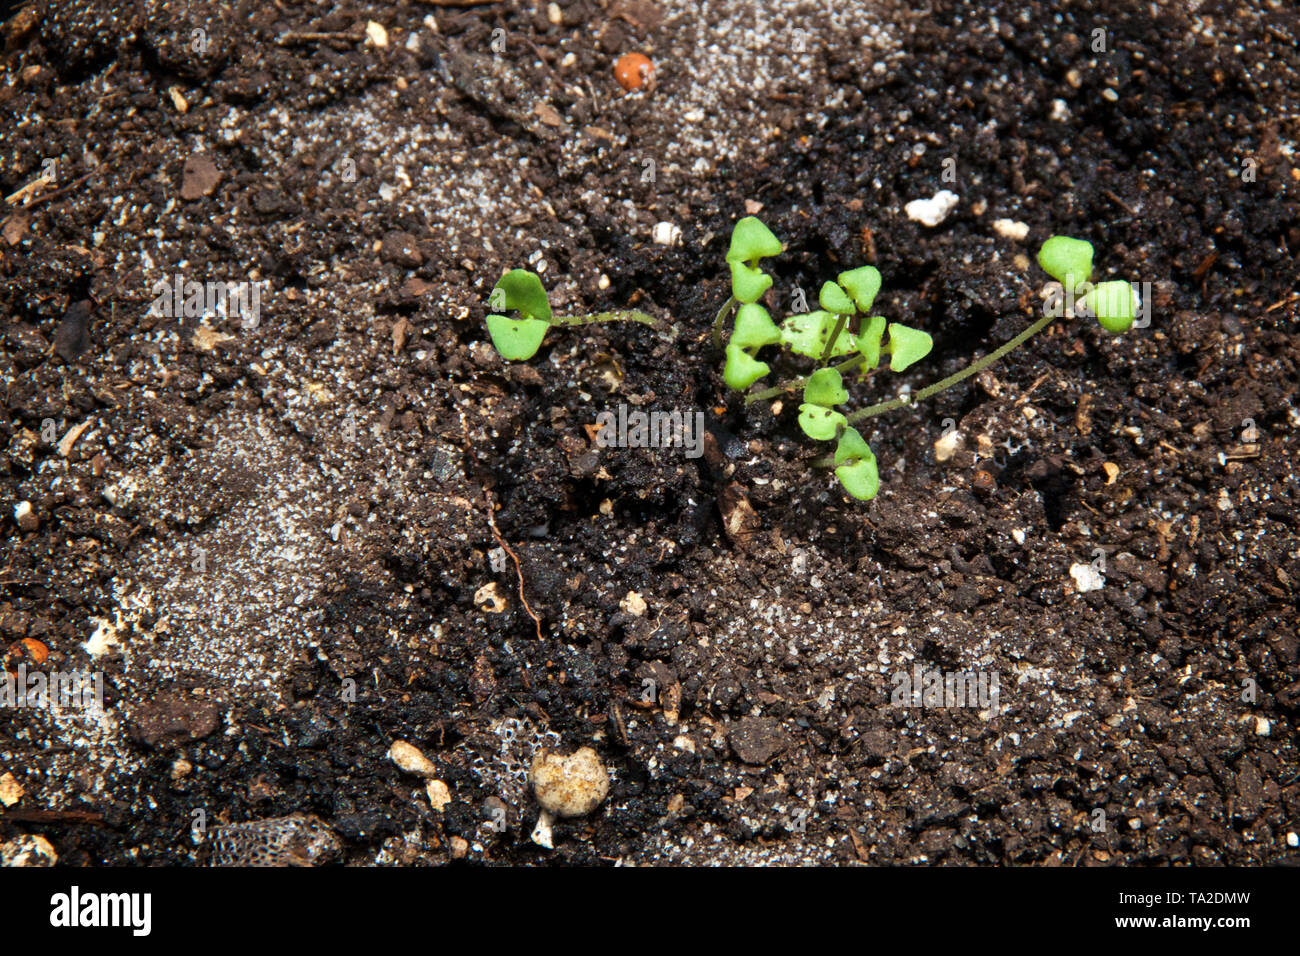 Looking down at small green lavender seedlings with cotyledons leaves in dirt. Stock Photo